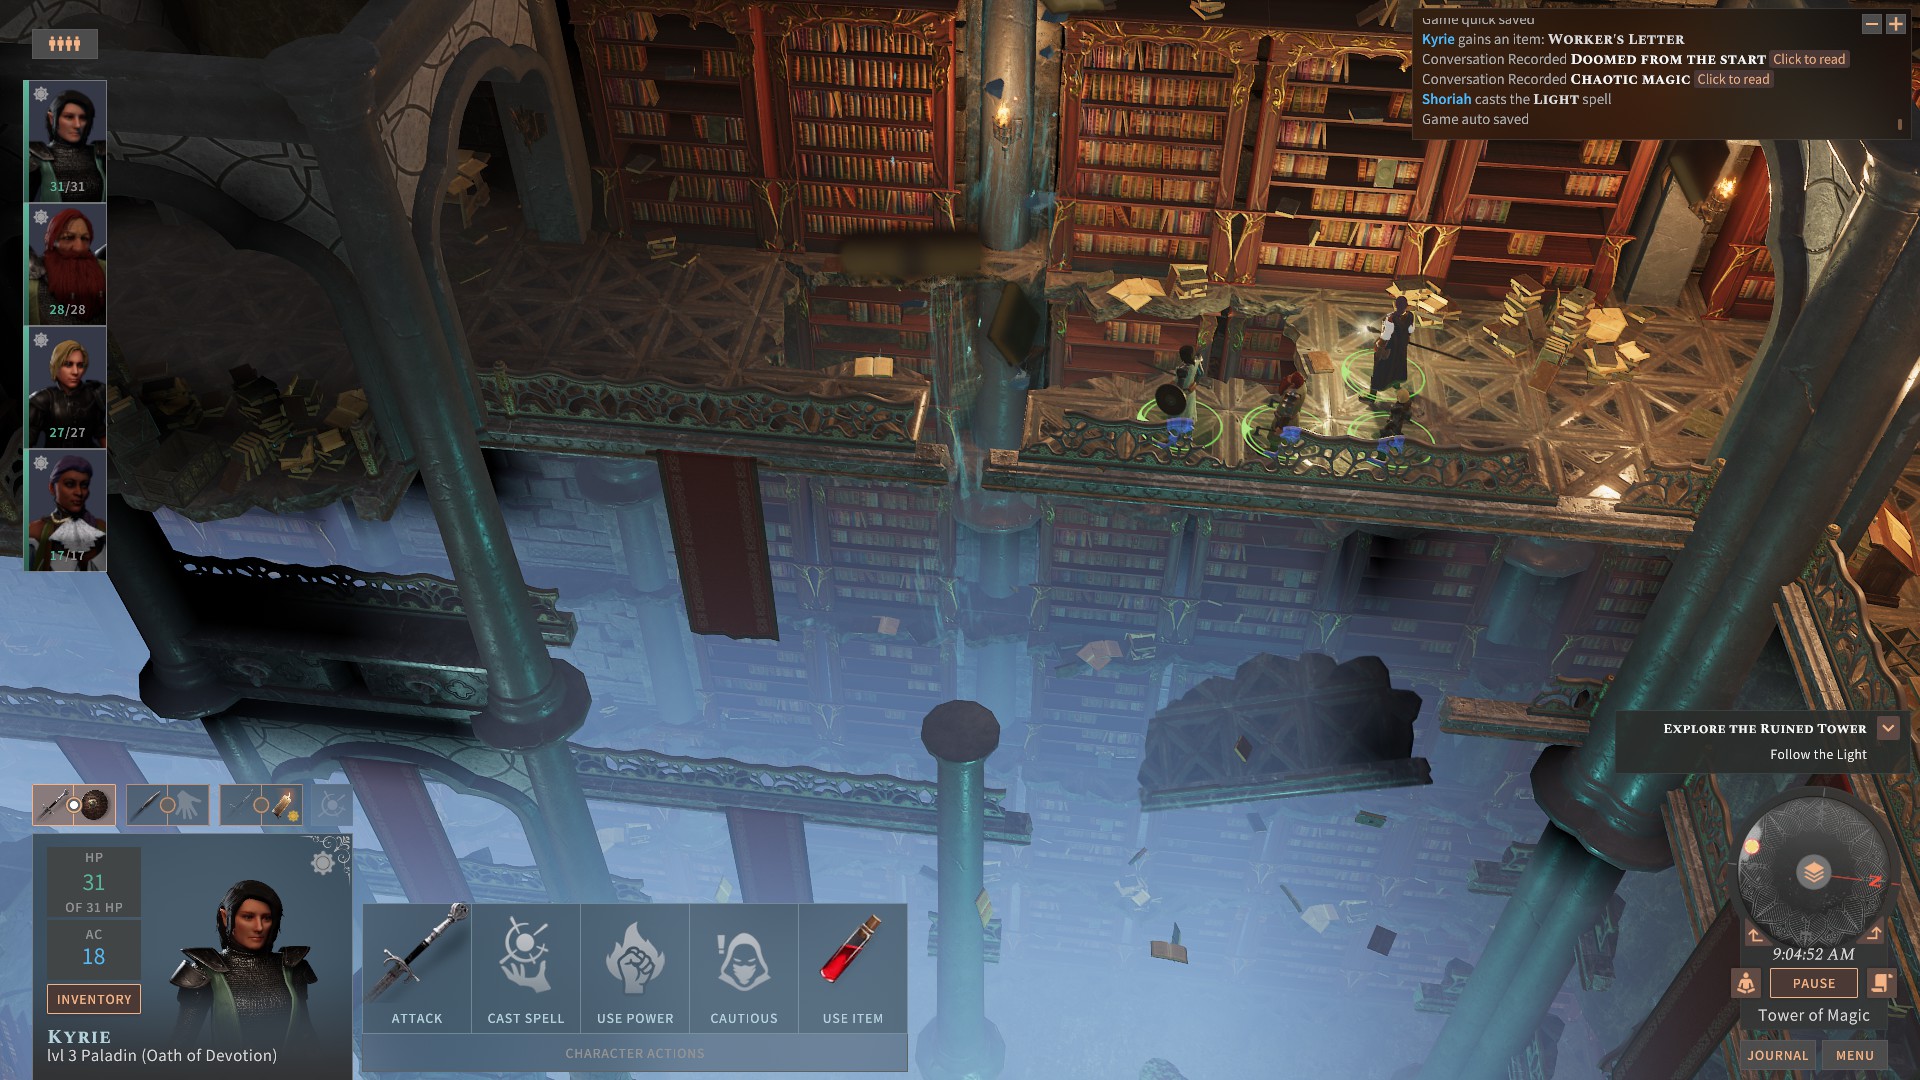 Magic lingers in this ancient library